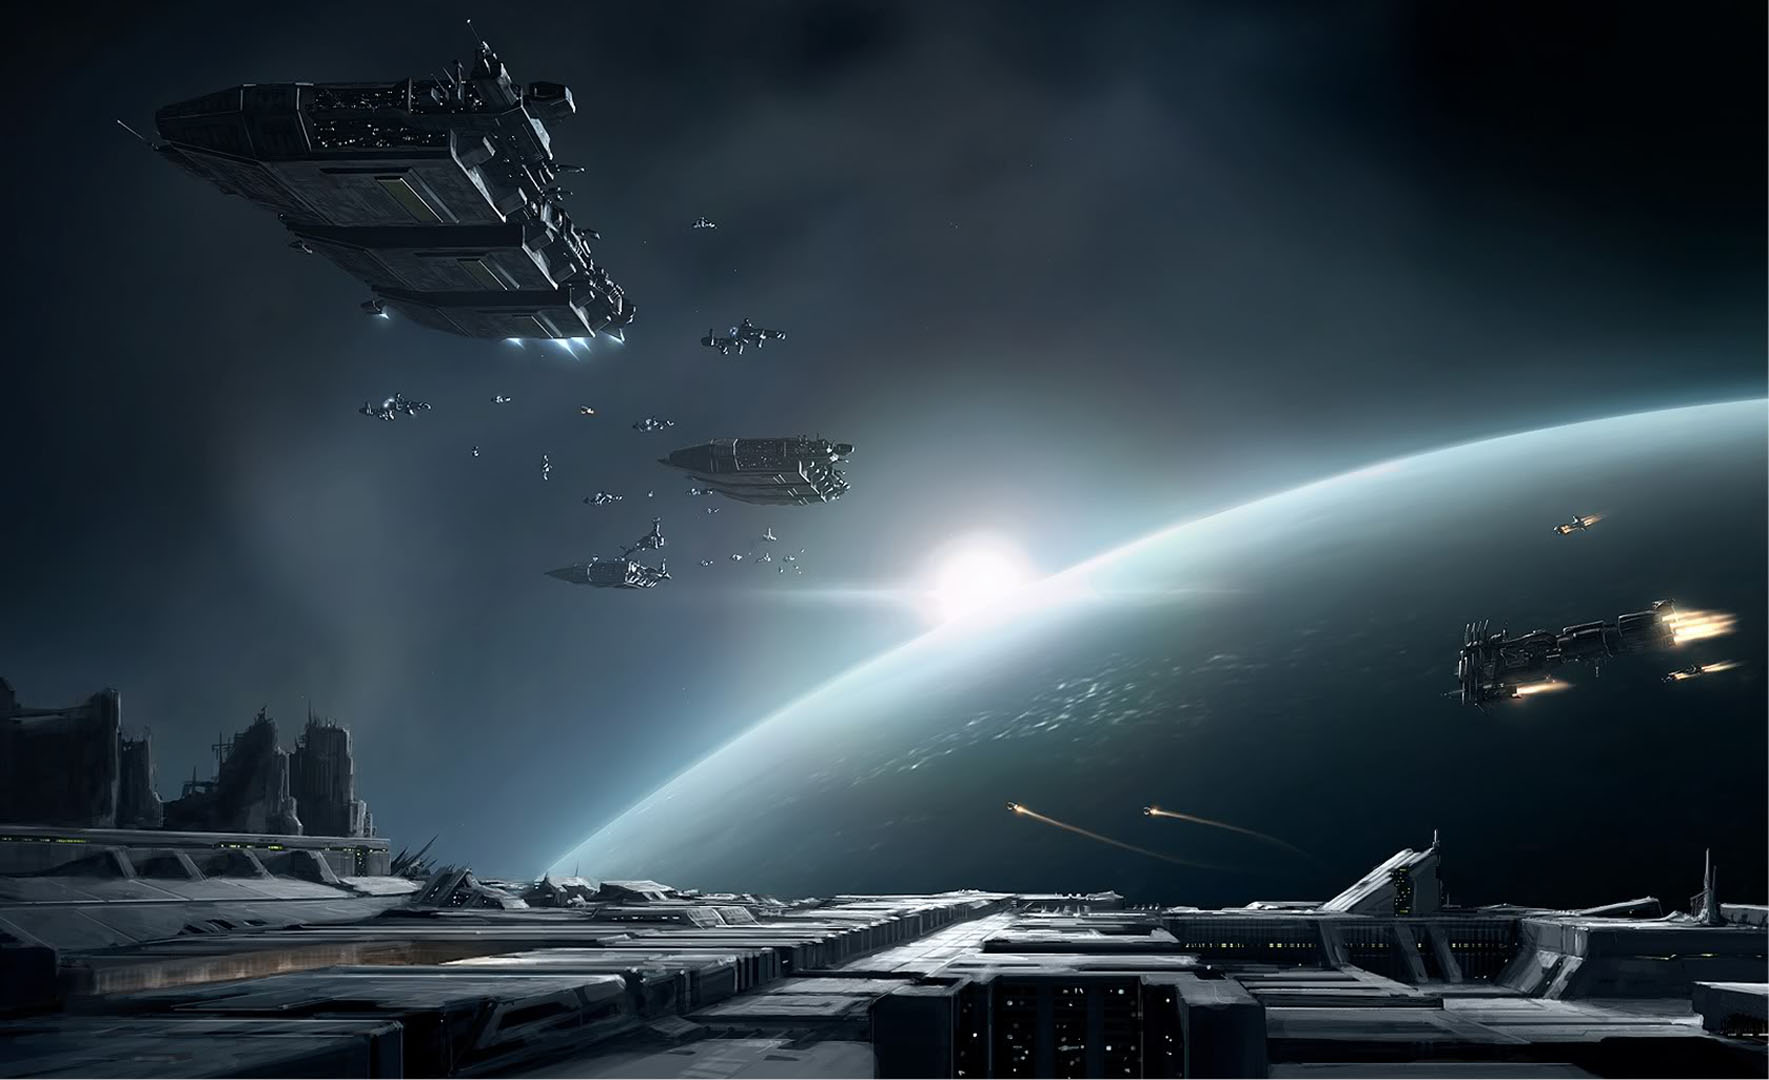 Space Armada At Event Horizon Rpg Games Wallpaper Image Featuring